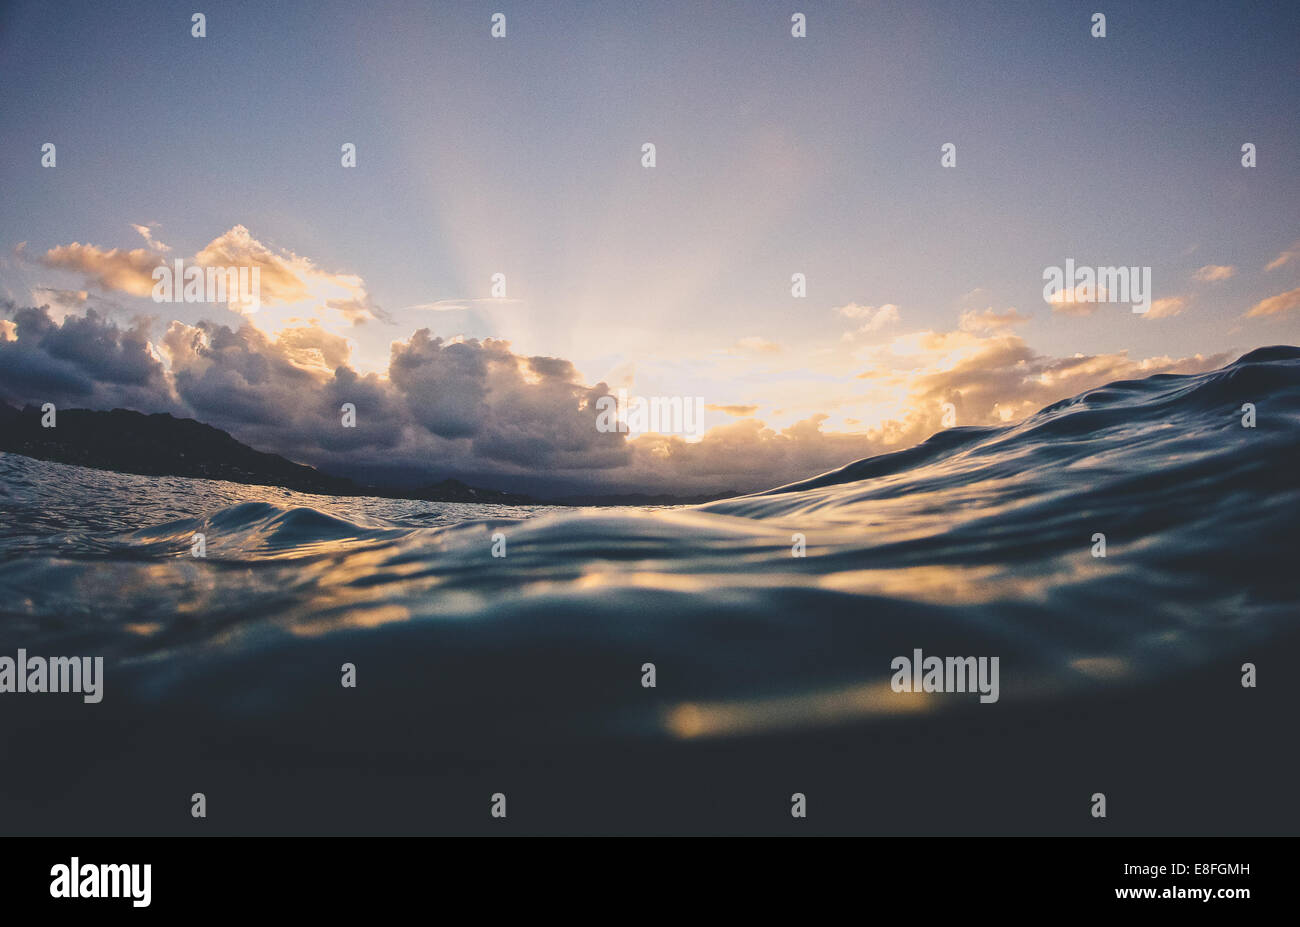 Water surface of ocean at sunset, Hawaii, United States Stock Photo